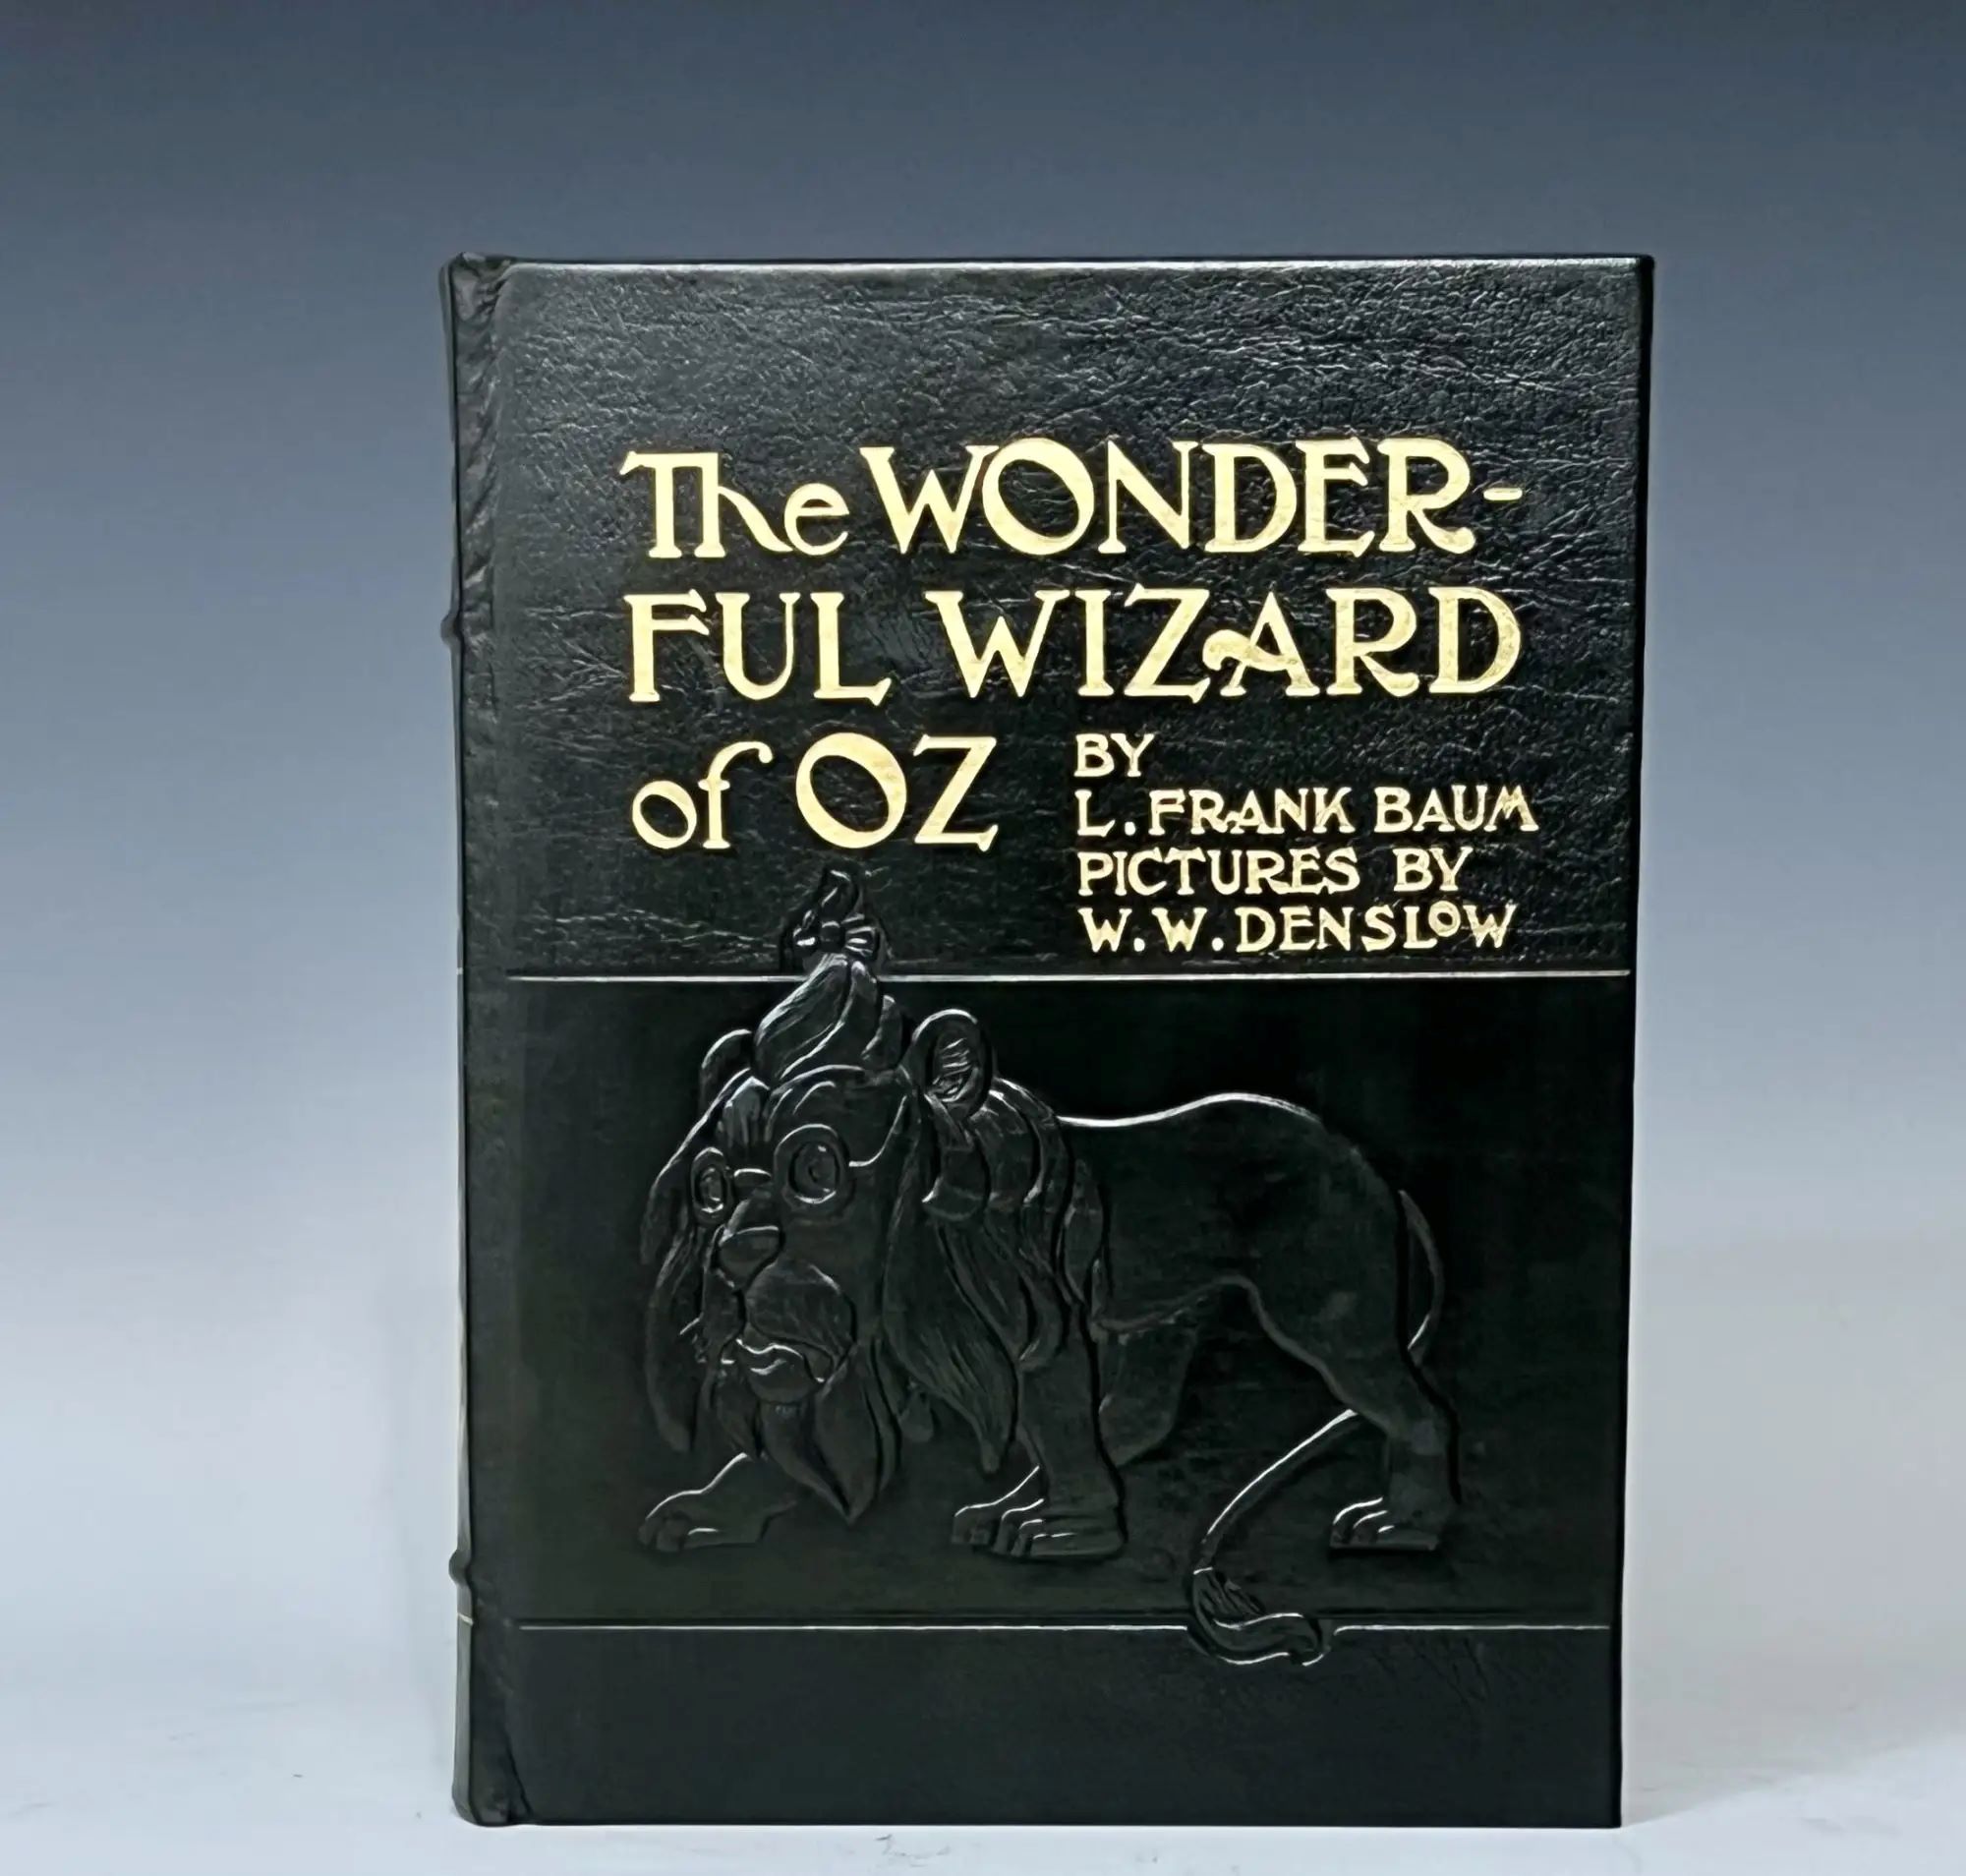 11-intriguing-facts-about-the-wonderful-wizard-of-oz-l-frank-baum